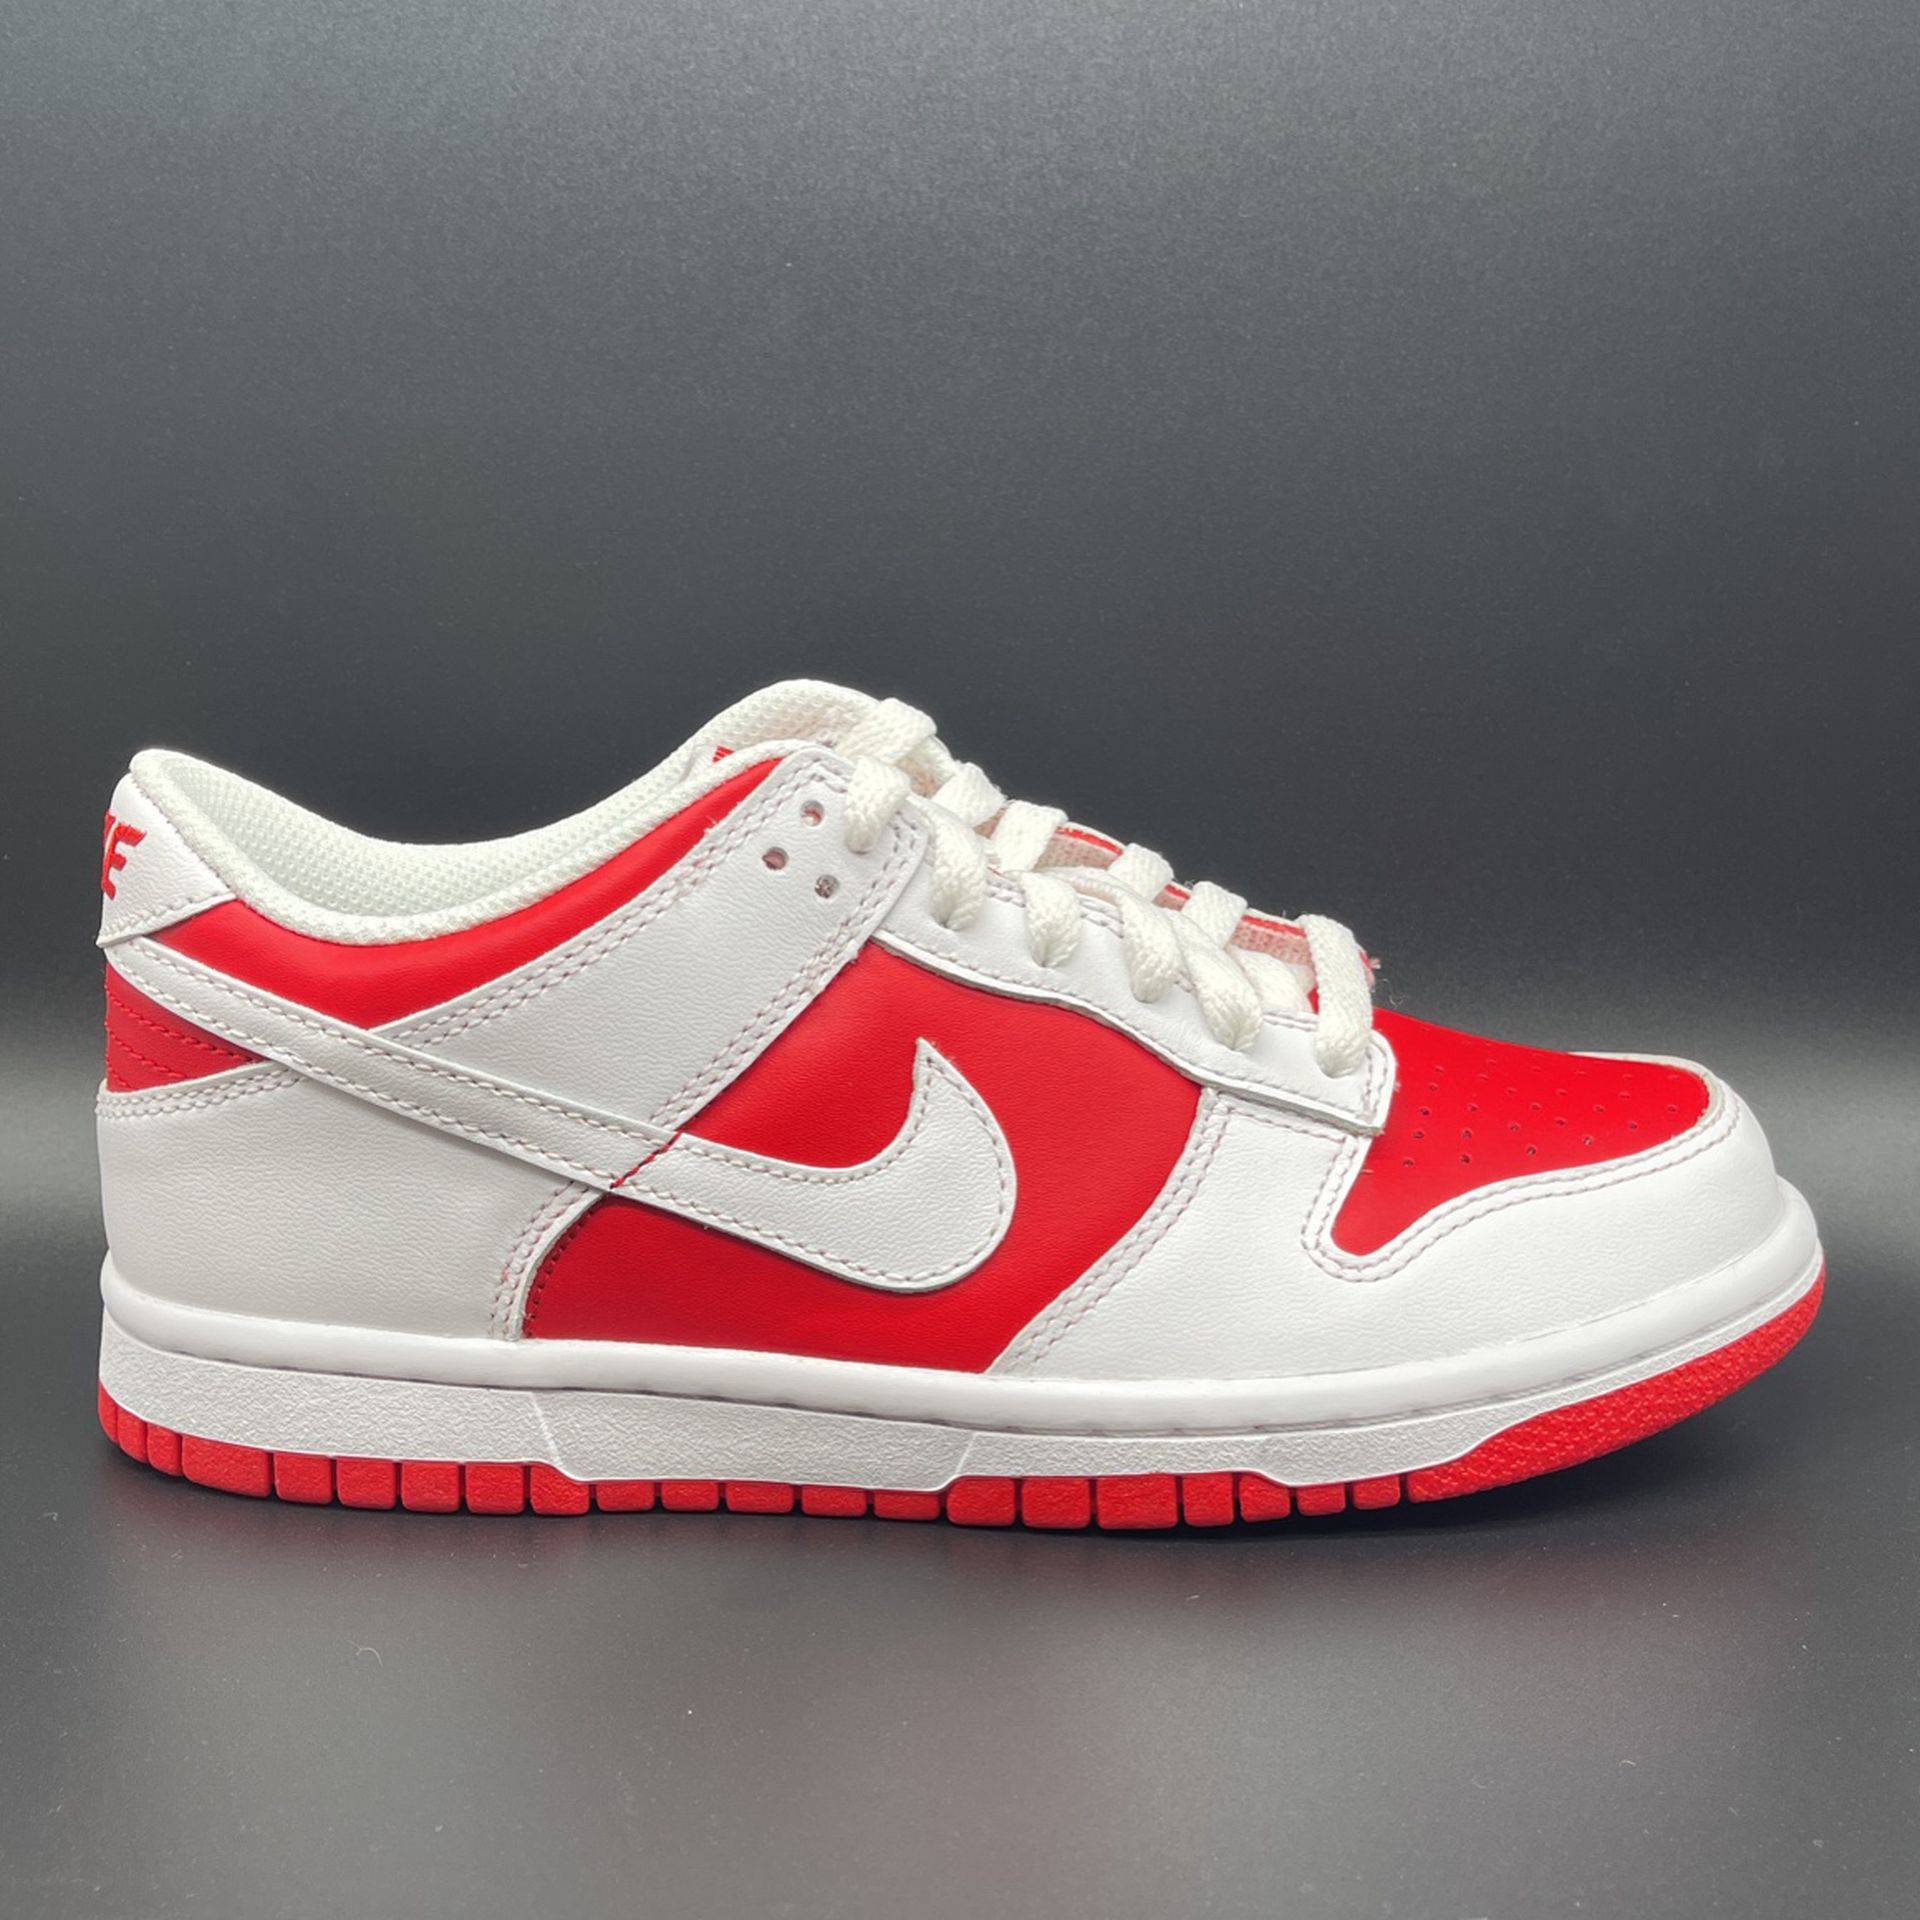 Nike Dunk Low Championship Red (2021) (GS) Sz. 4.5Y